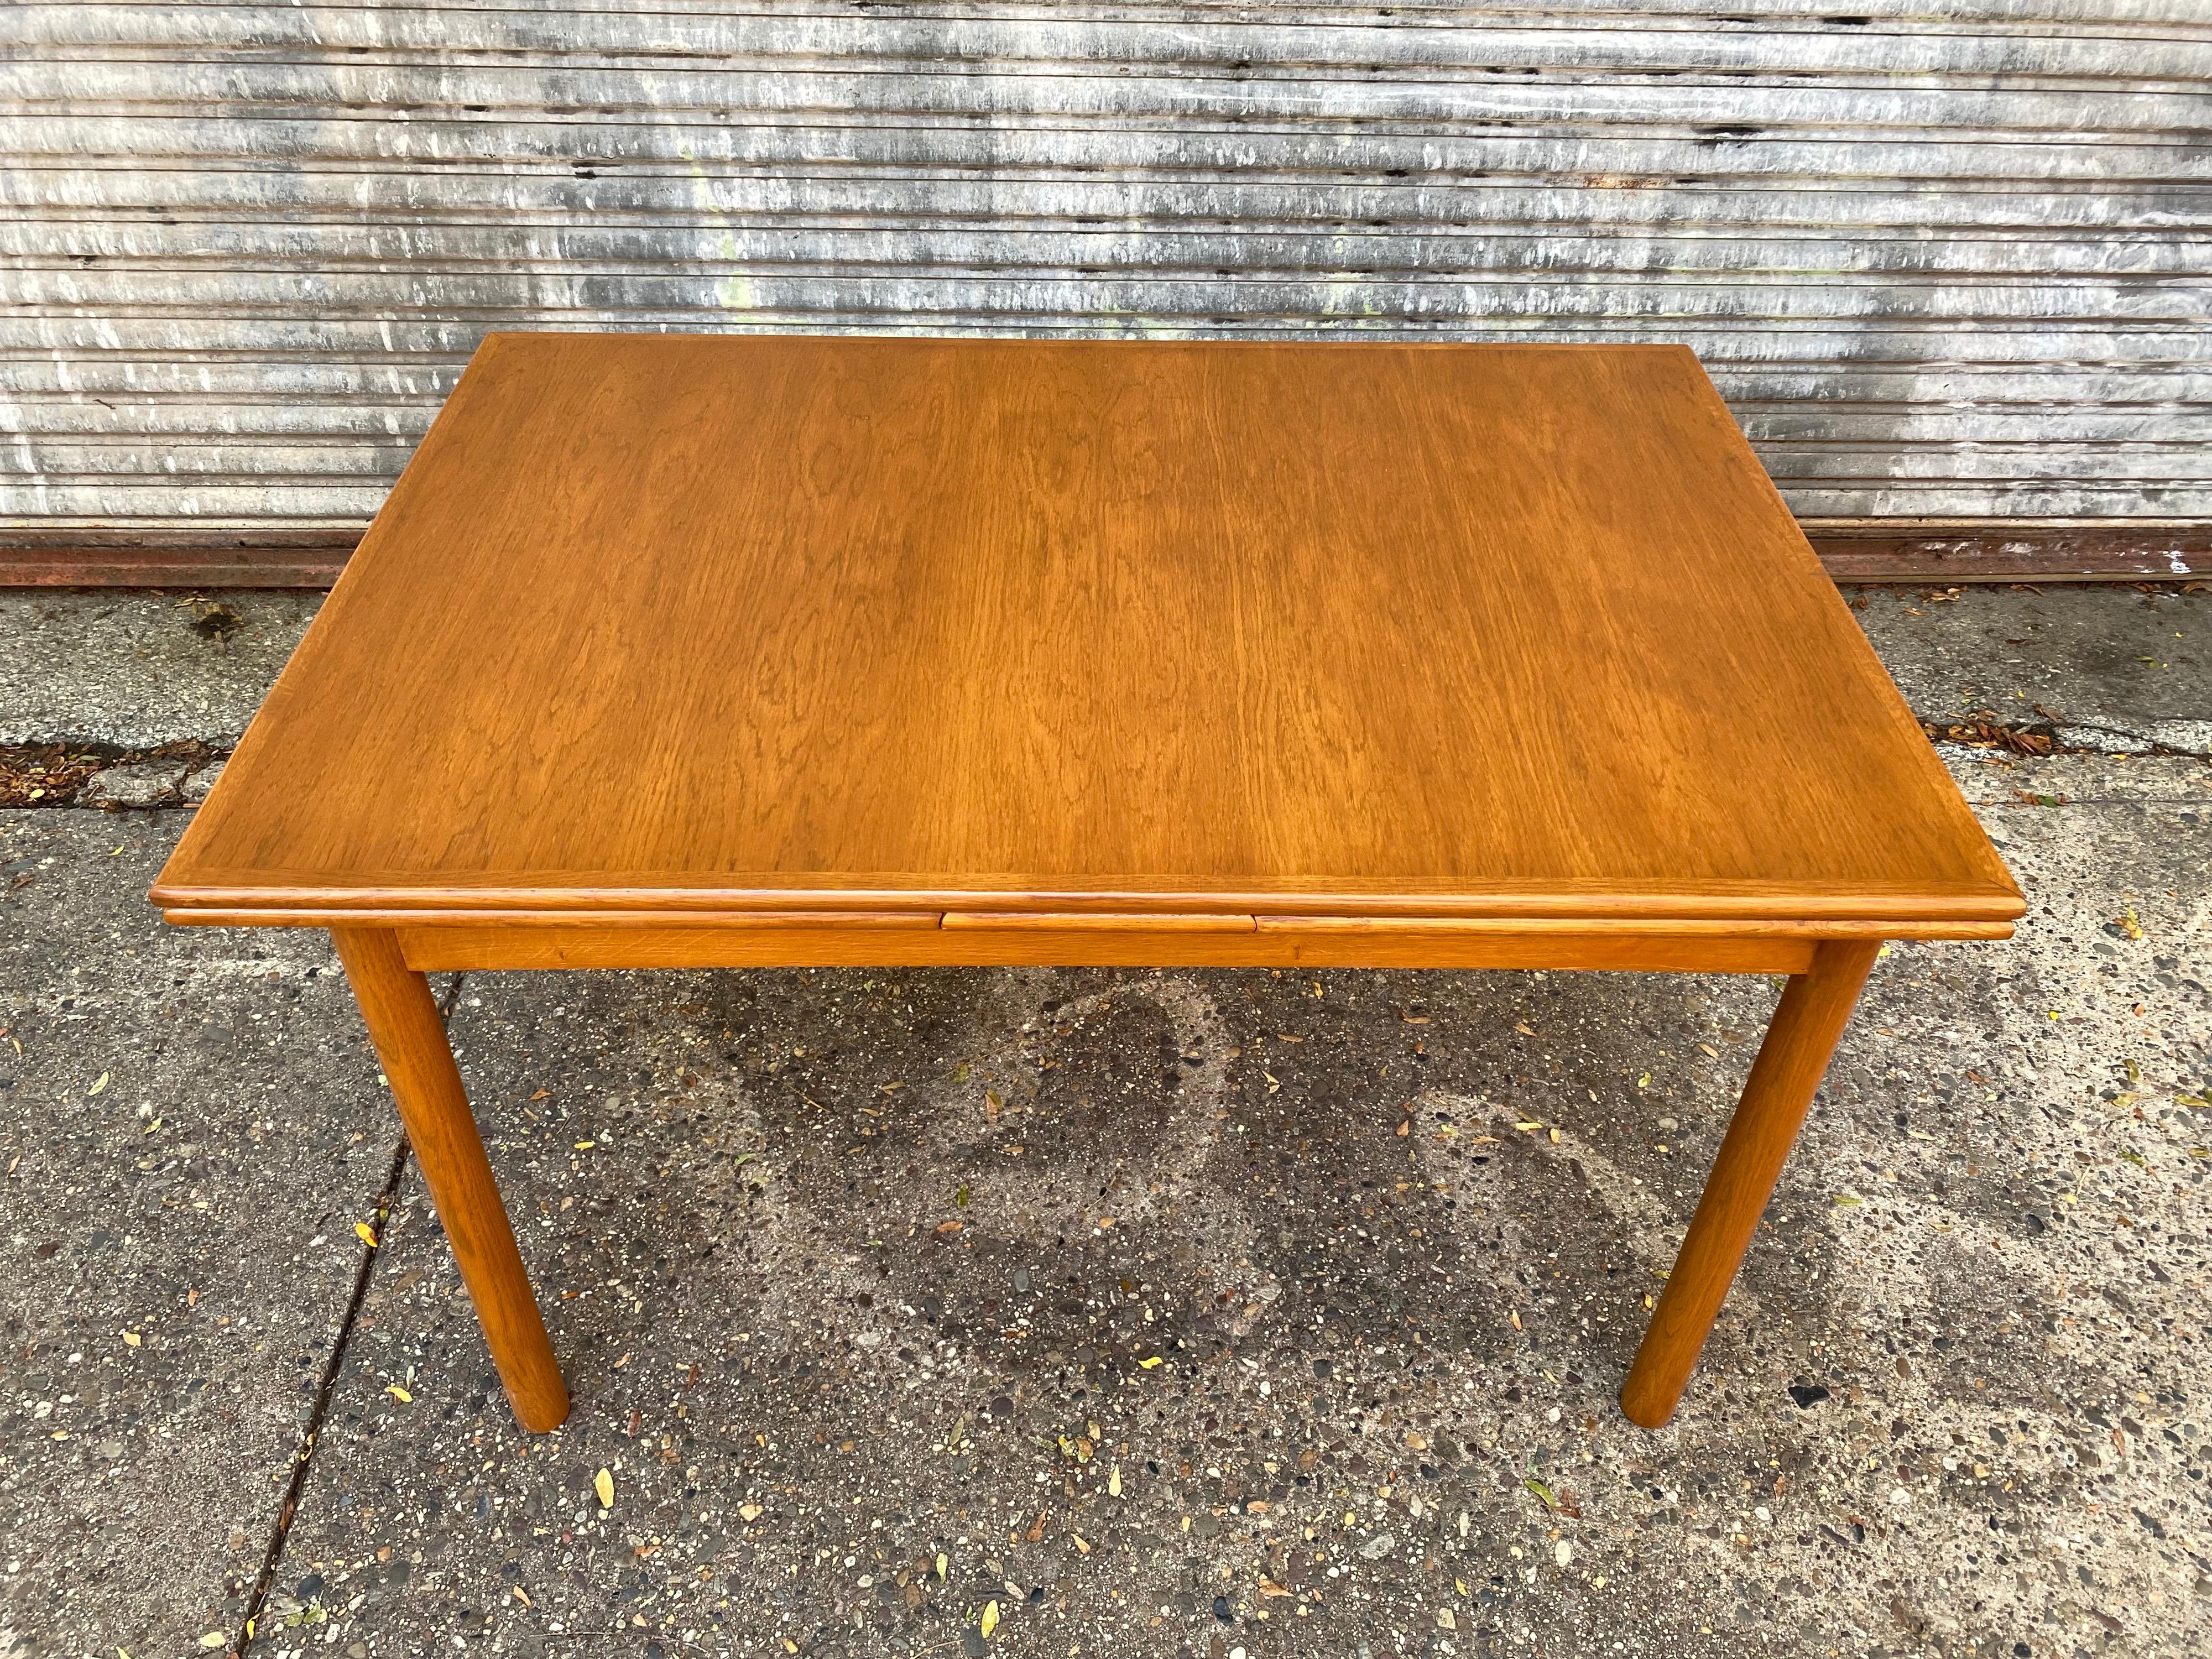 Danish refractory oak dining table. Newly refinished and ready to go! Little harder to find in Oak, looks great mixed with teak chairs or rosewood! Nice smaller size and scale! Leaves pull out easily. Table when fully extended is 89.5 long and 33.5